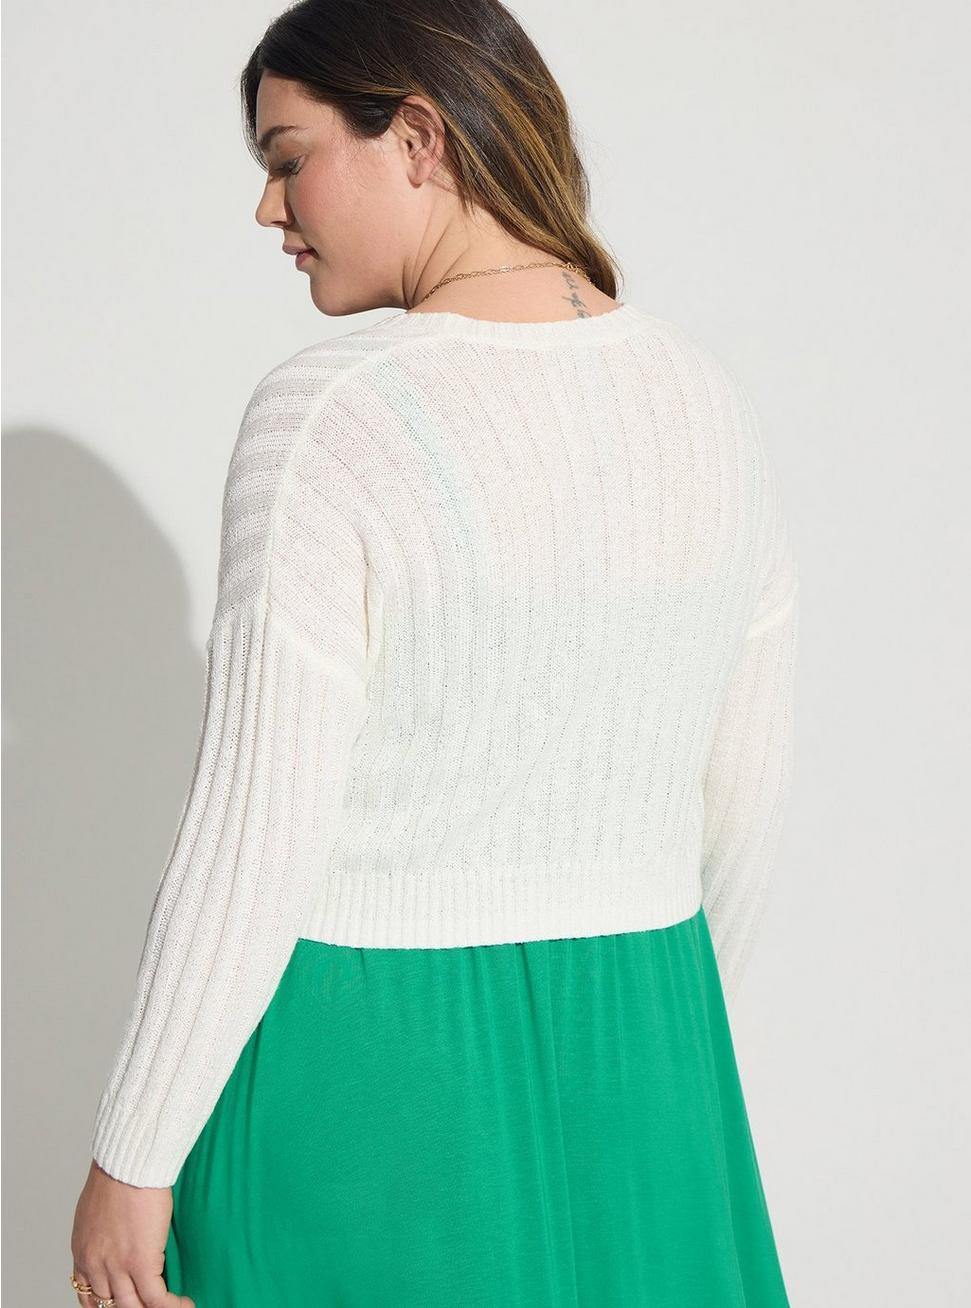 Cropped Shrug Open Front Sweater, WHITE, alternate